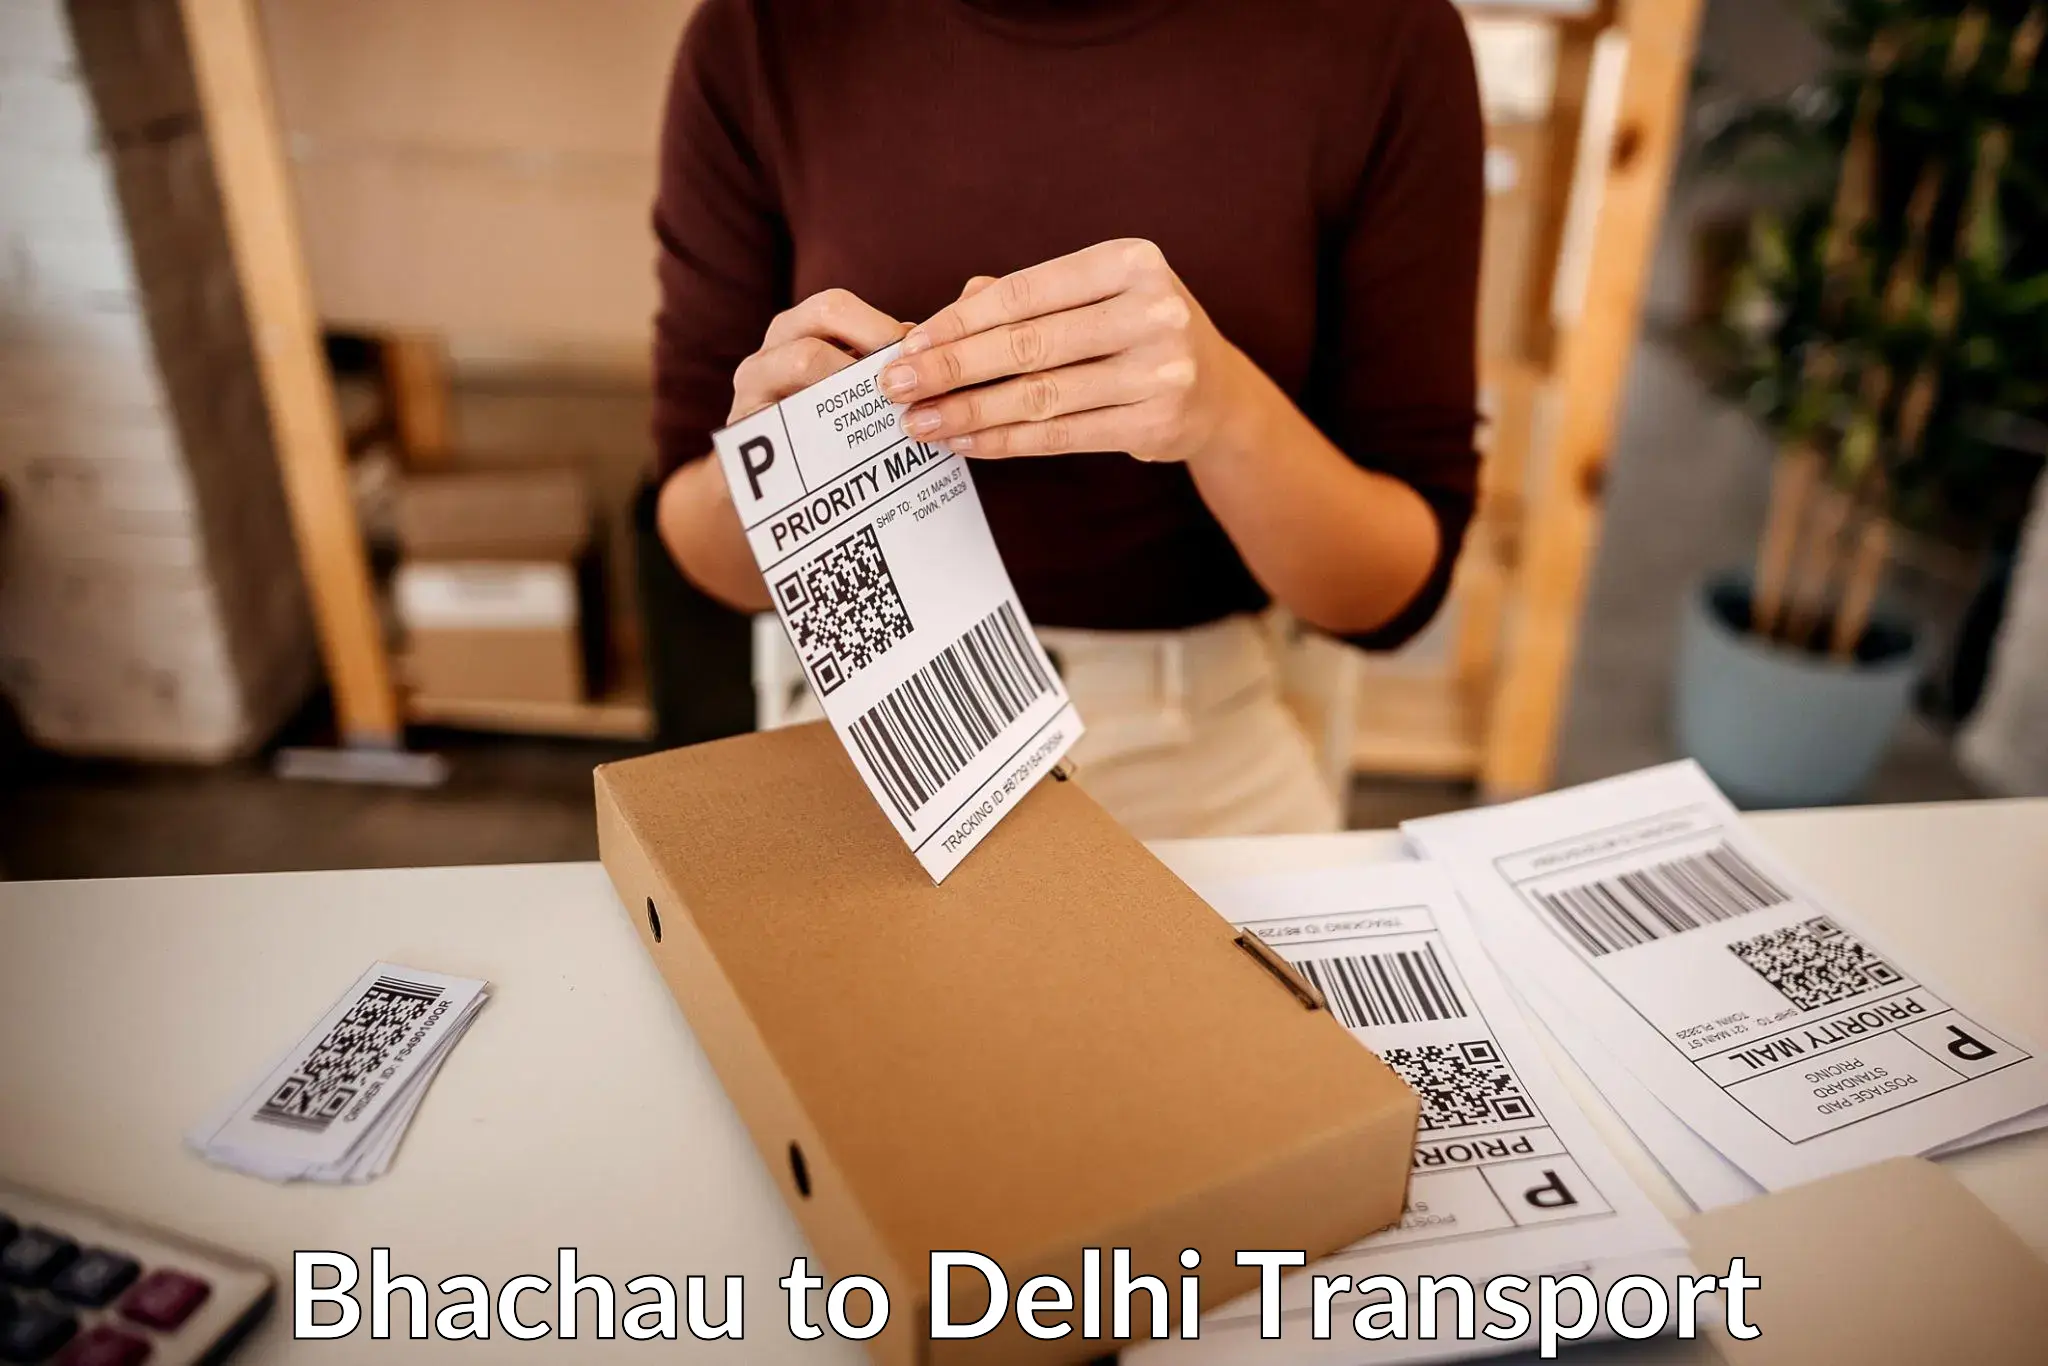 Nationwide transport services Bhachau to Lodhi Road